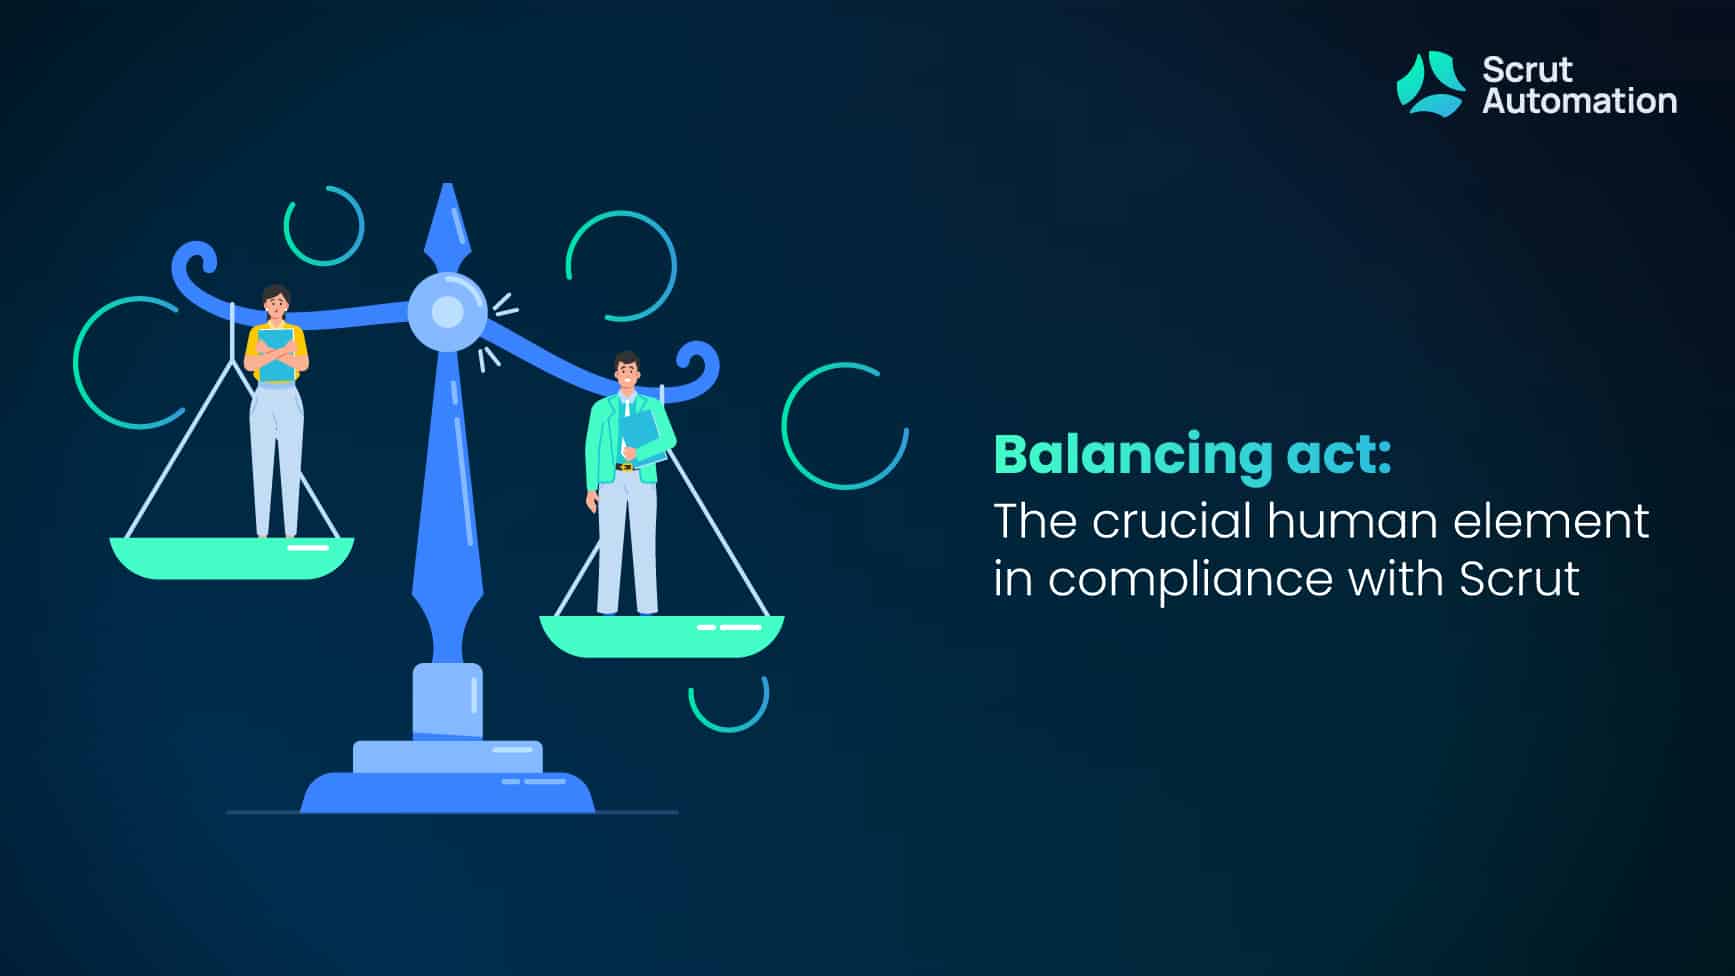 Balancing act: The crucial human element in compliance with Scrut